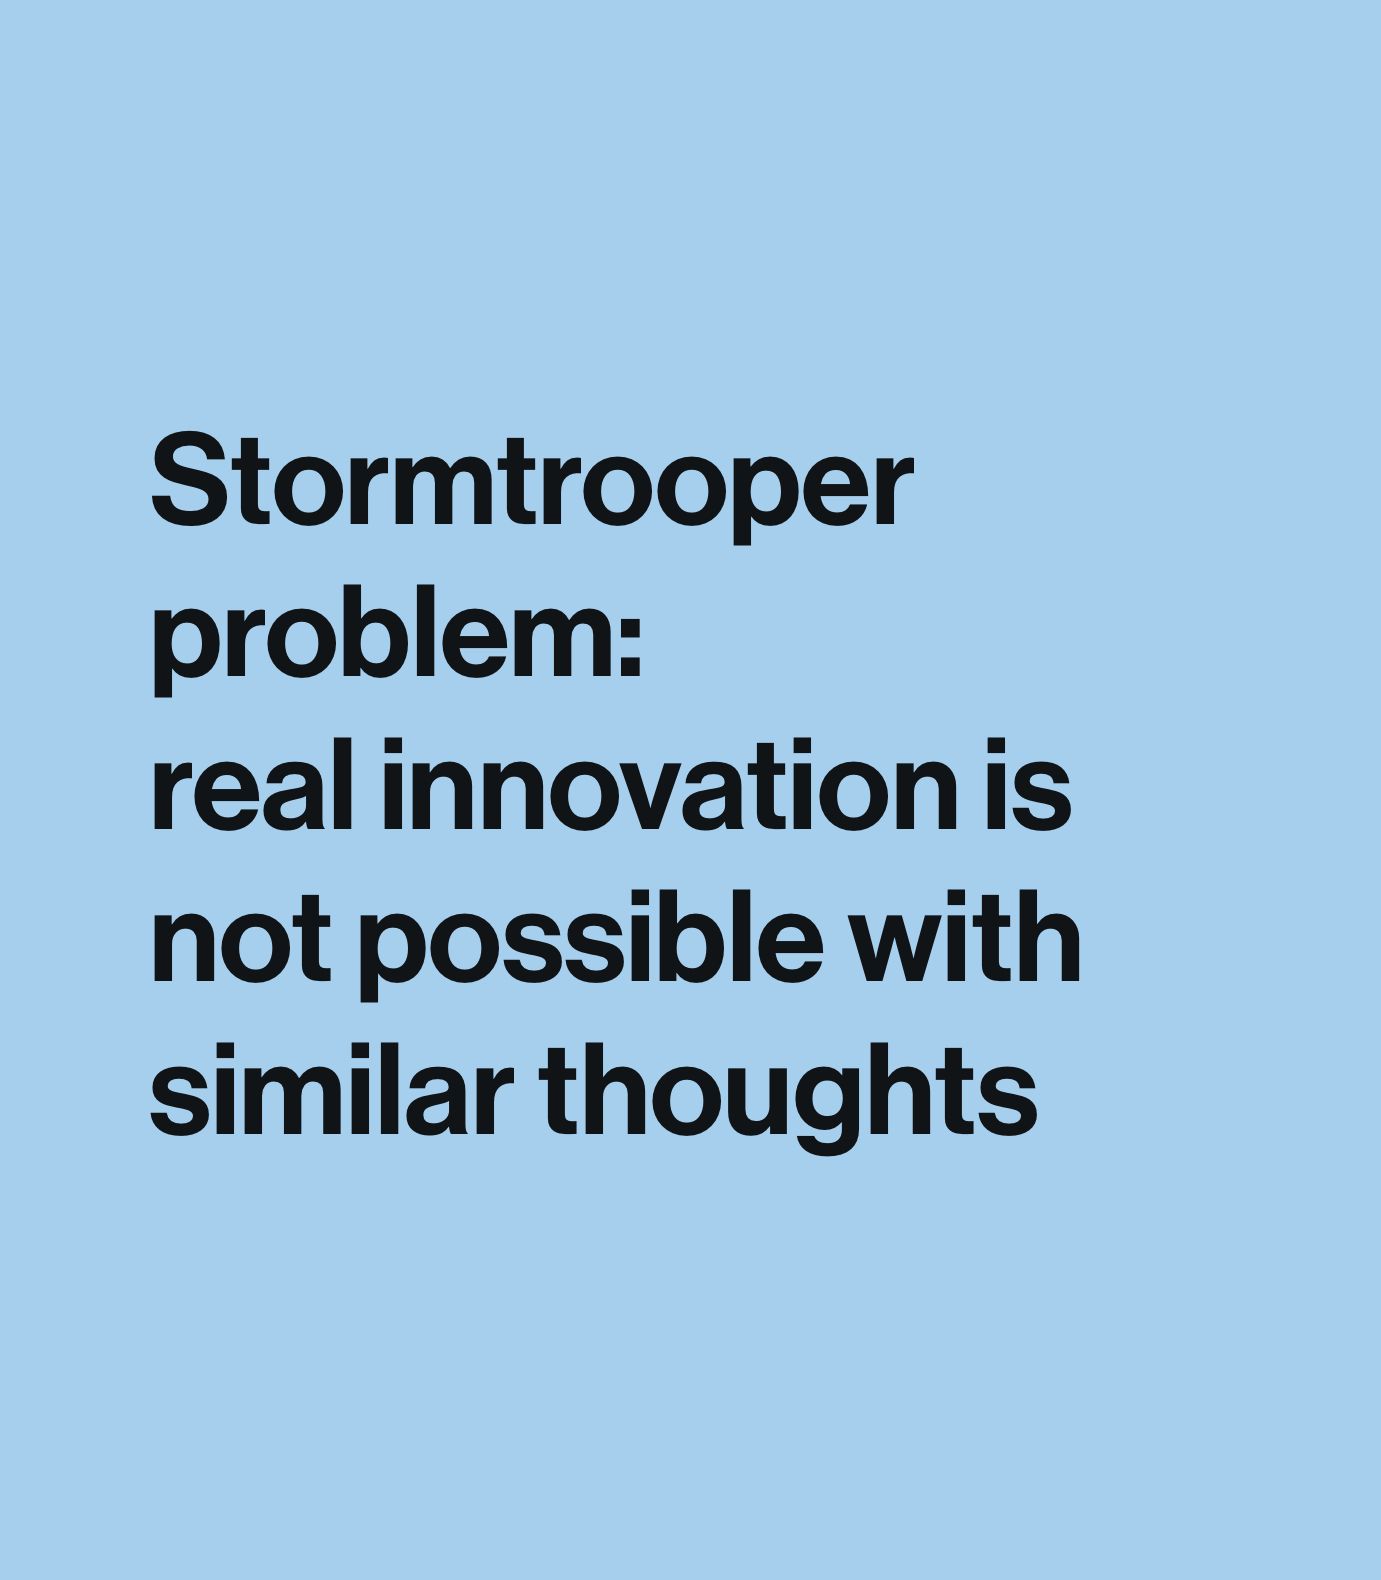 Stormtrooper problem: real innovation is not possible with similar thoughts